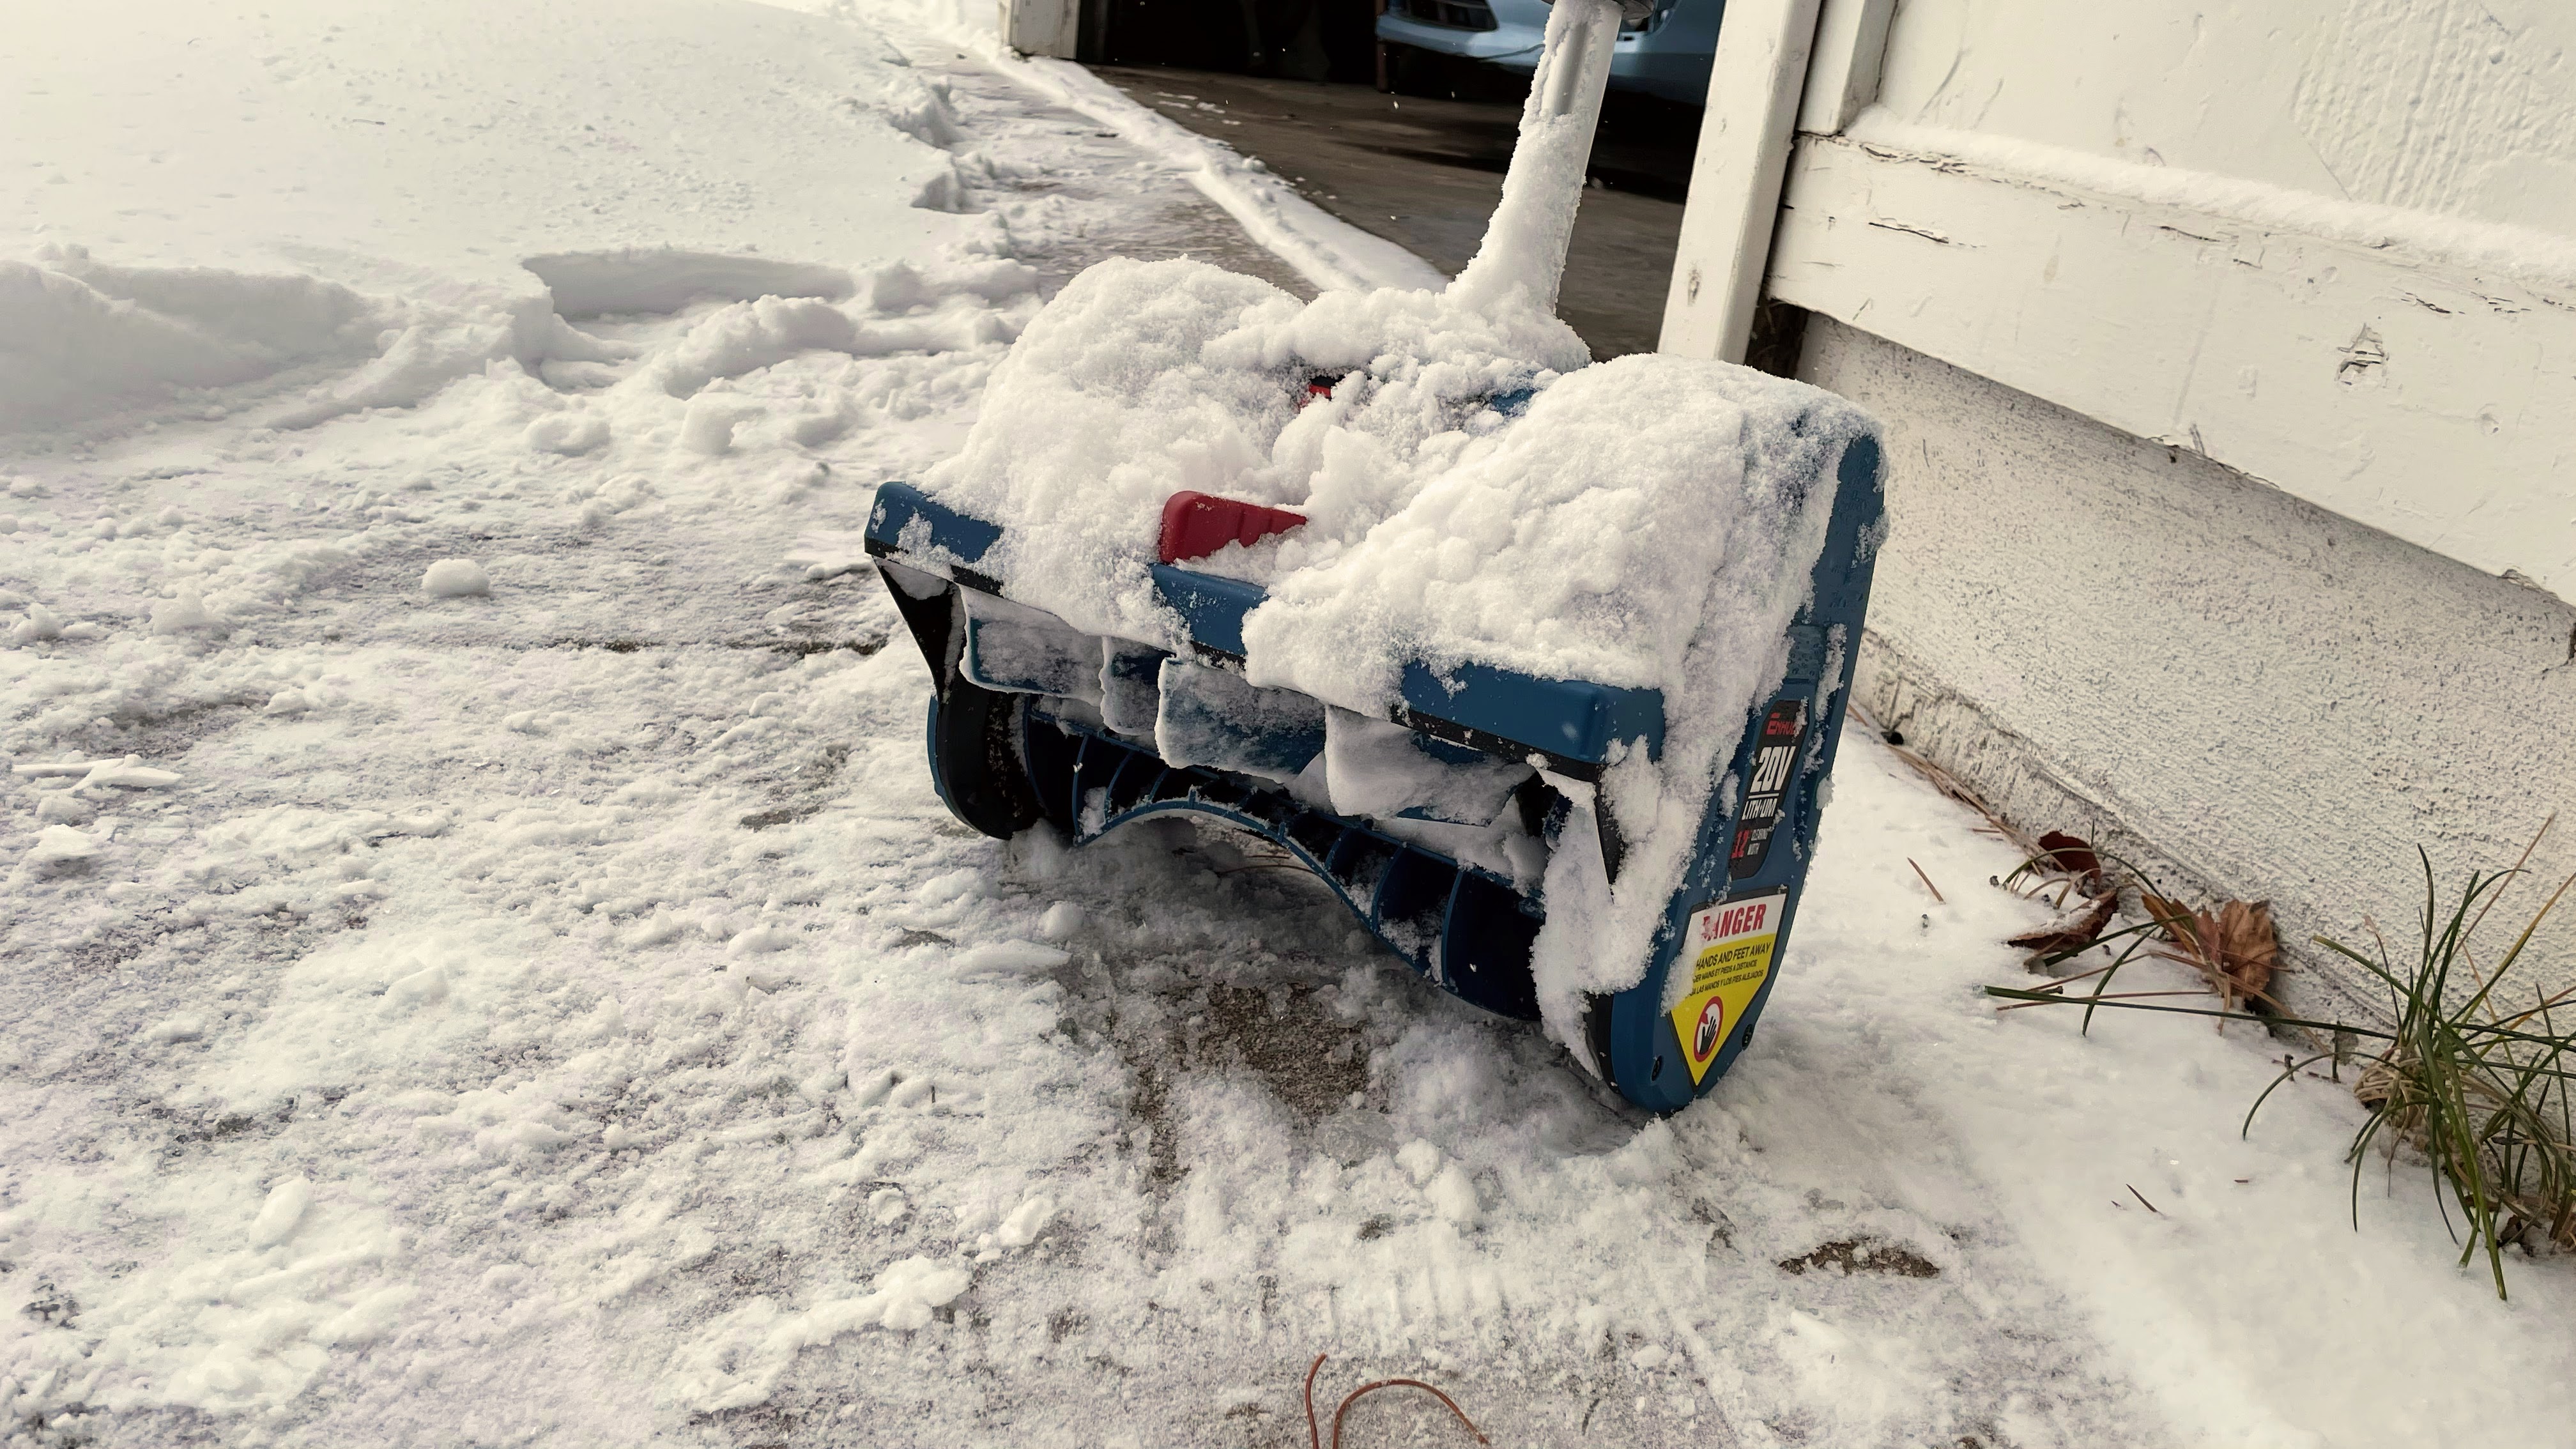 How much Snow can a soft top handle?